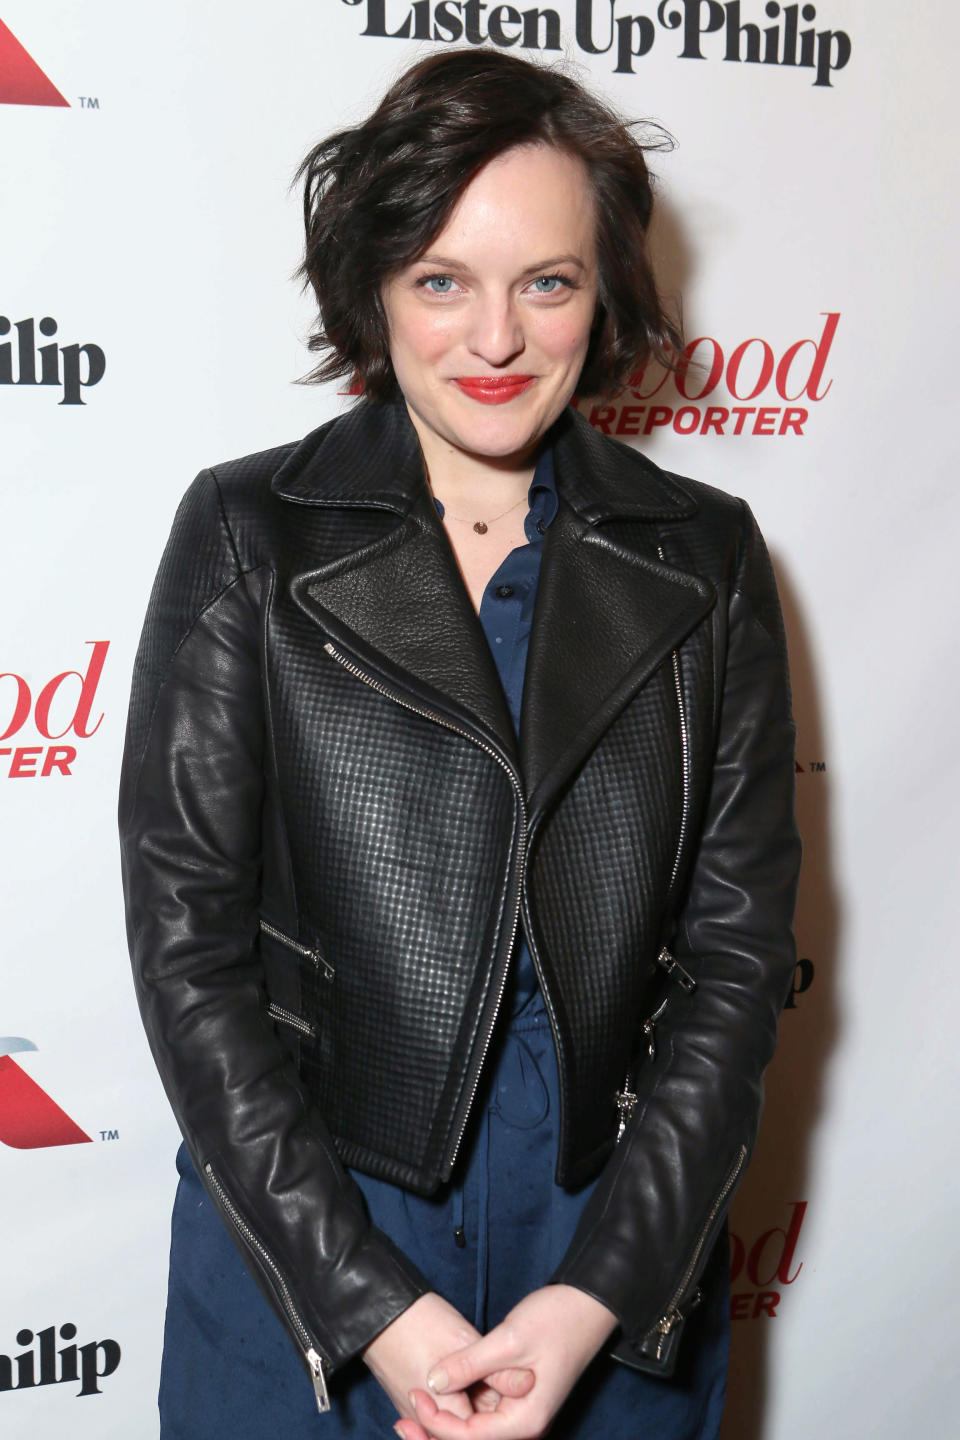 IMAGE DISTRIBUTED FOR THE HOLLYWOOD REPORTER - Elisabeth Moss arrives at the Listen Up Philip premiere party presented by The Hollywood Reporter & American Airlines, on Monday, Jan. 20, 2014 in Park City, Utah. (Photo by Alexandra Wyman/Invision for The Hollywood Reporter/AP Images)